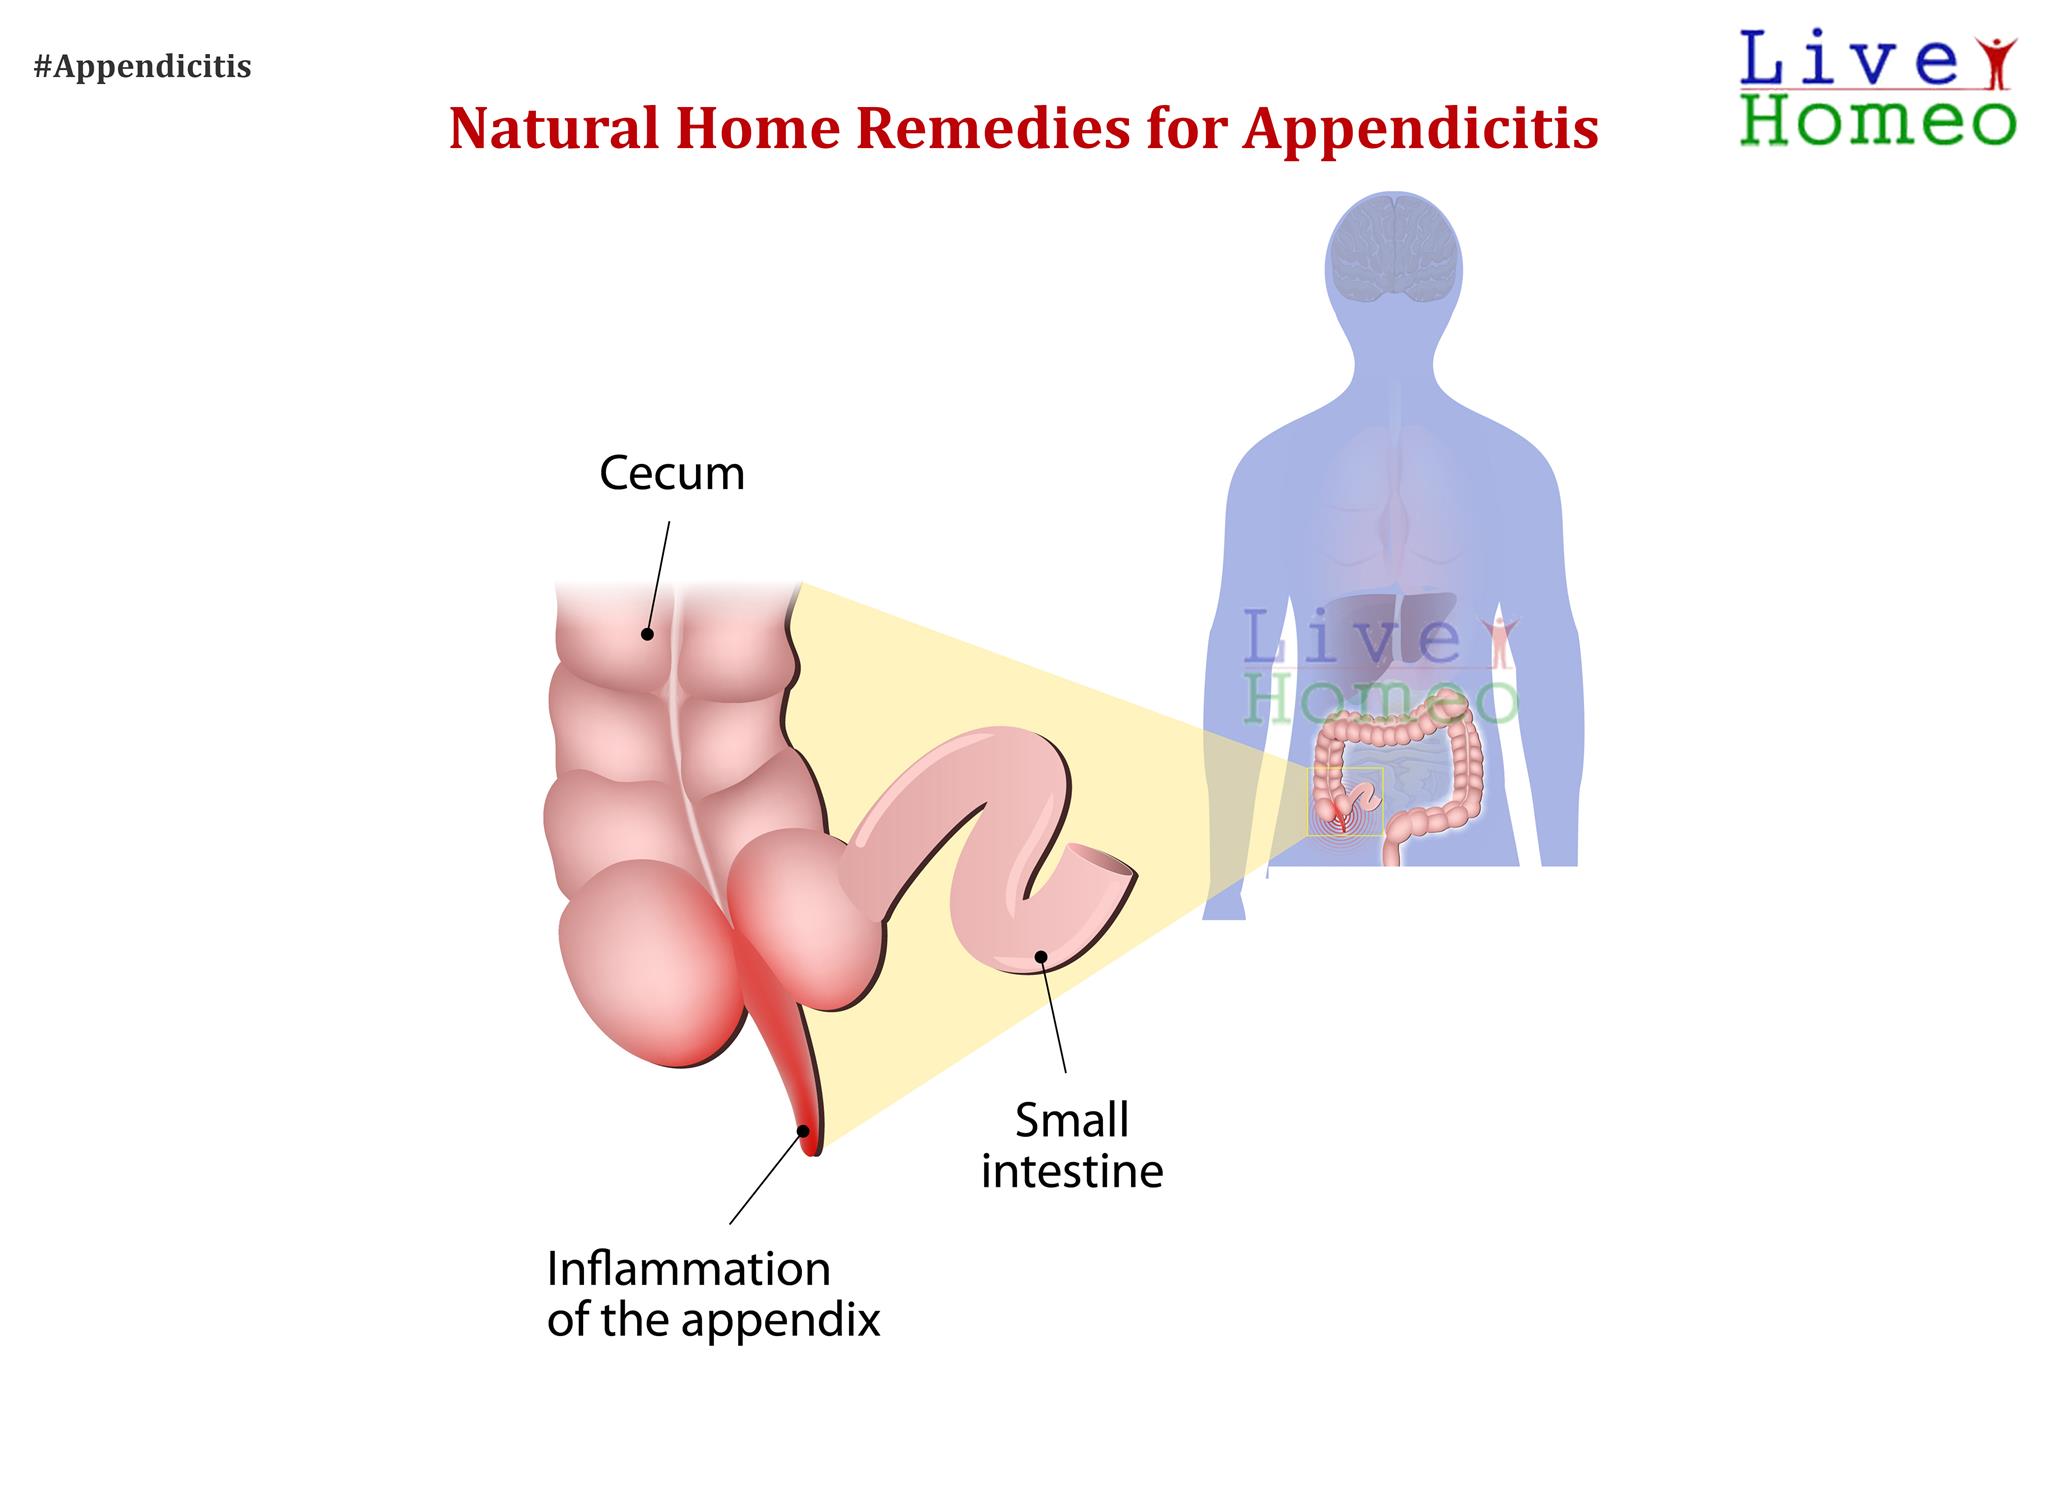 Natural Home remedies for Appendicities